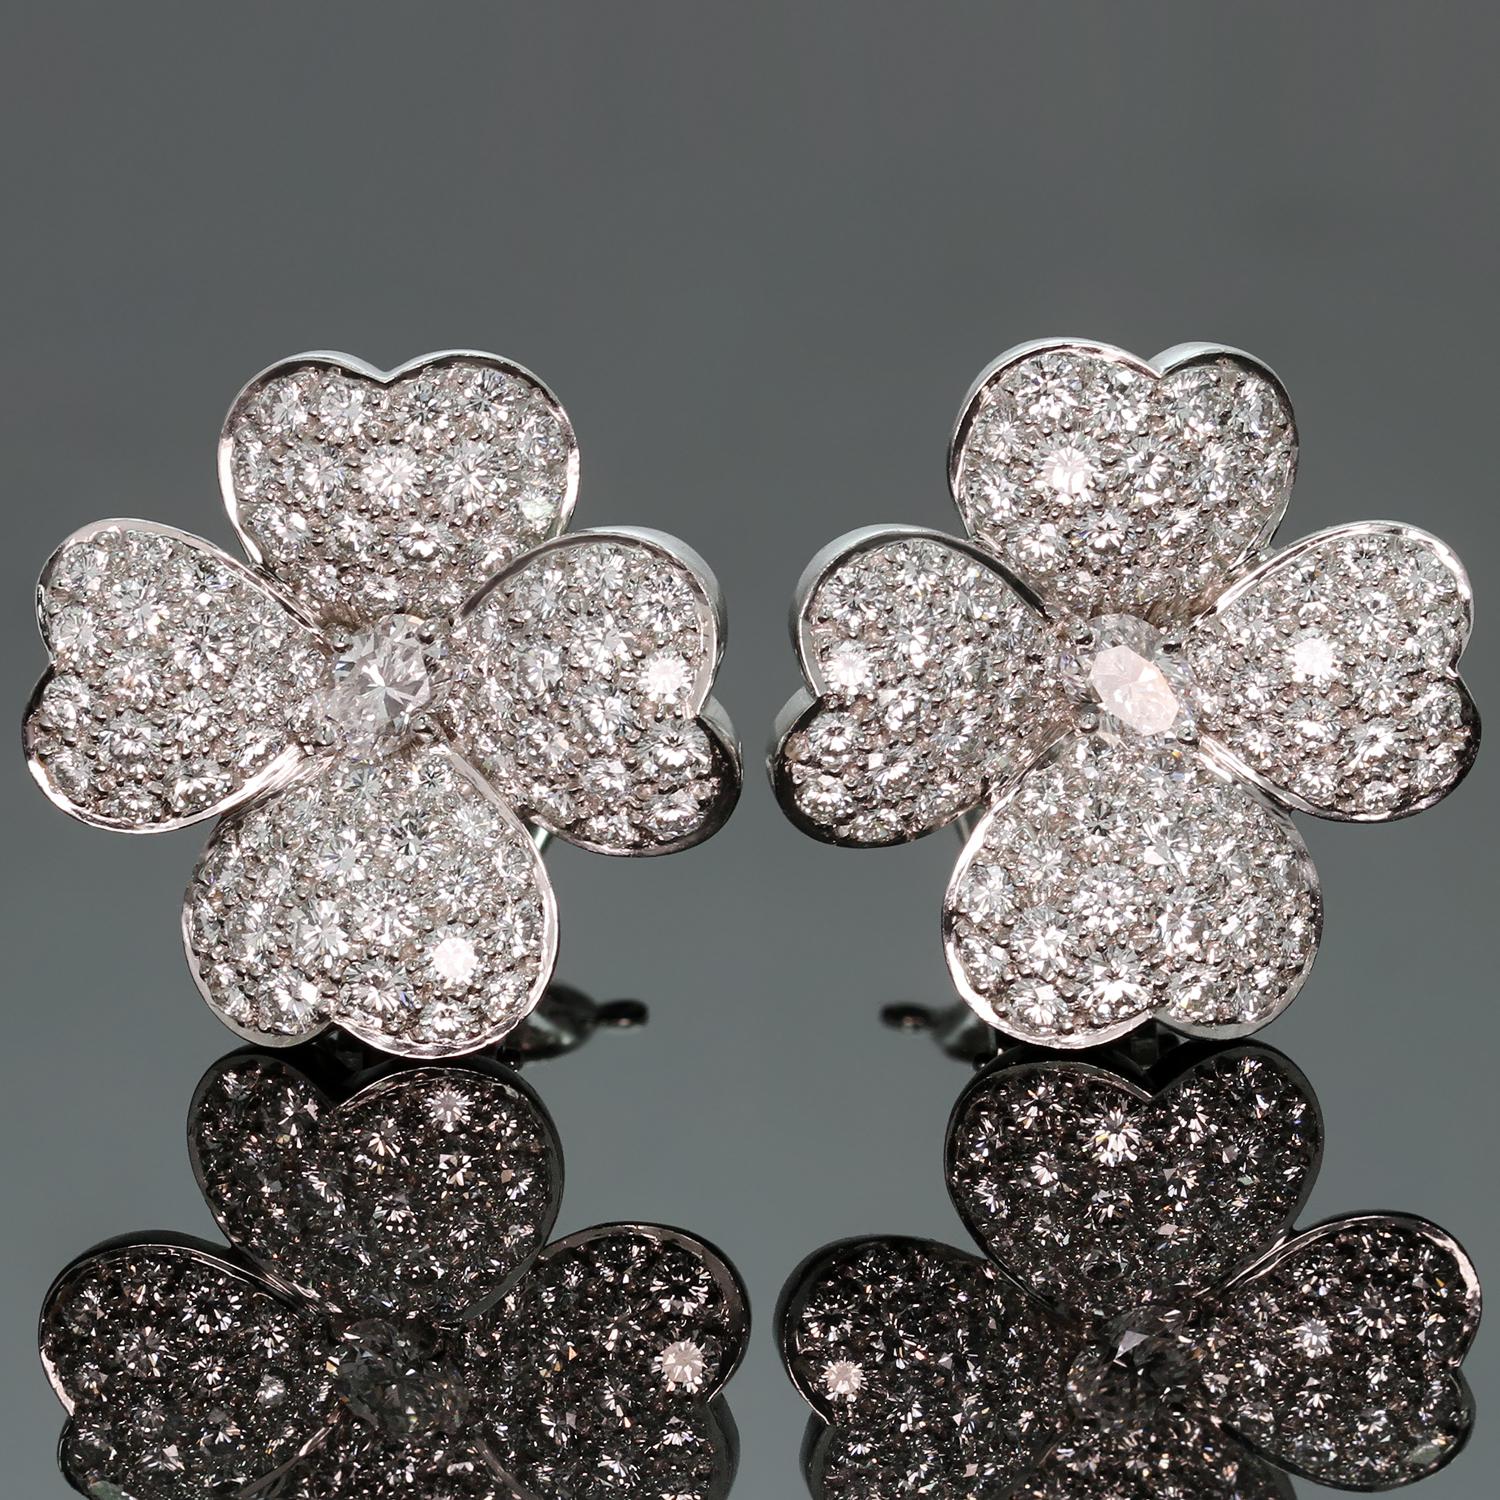 These exquisite large model clip-on earrings from the Cosmos collection by Van Cleef & Arpels feature a delicate flower design crafted in platinum and set with brilliant-cut round diamonds of an estimated 5.0 - 5.50 carats. Made in France circa